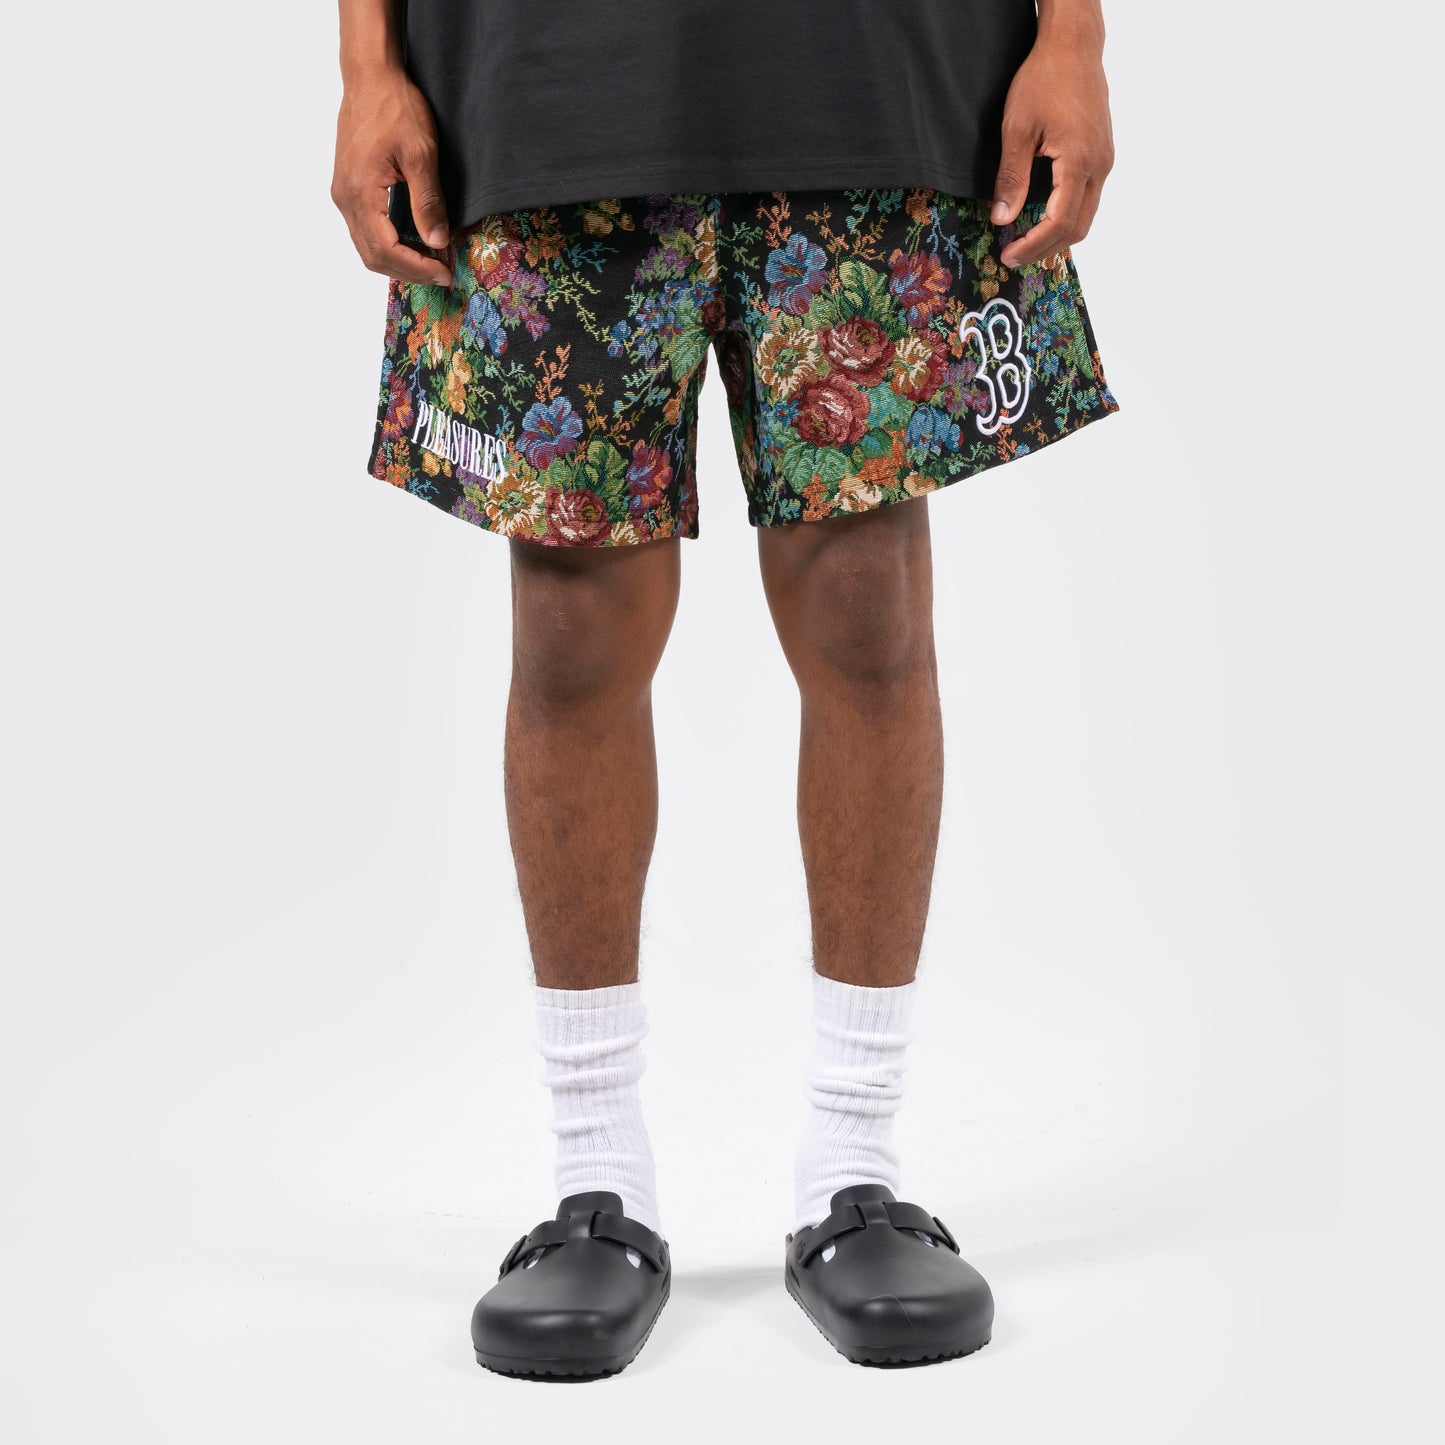 FLORAL SHORTS - RED SOX